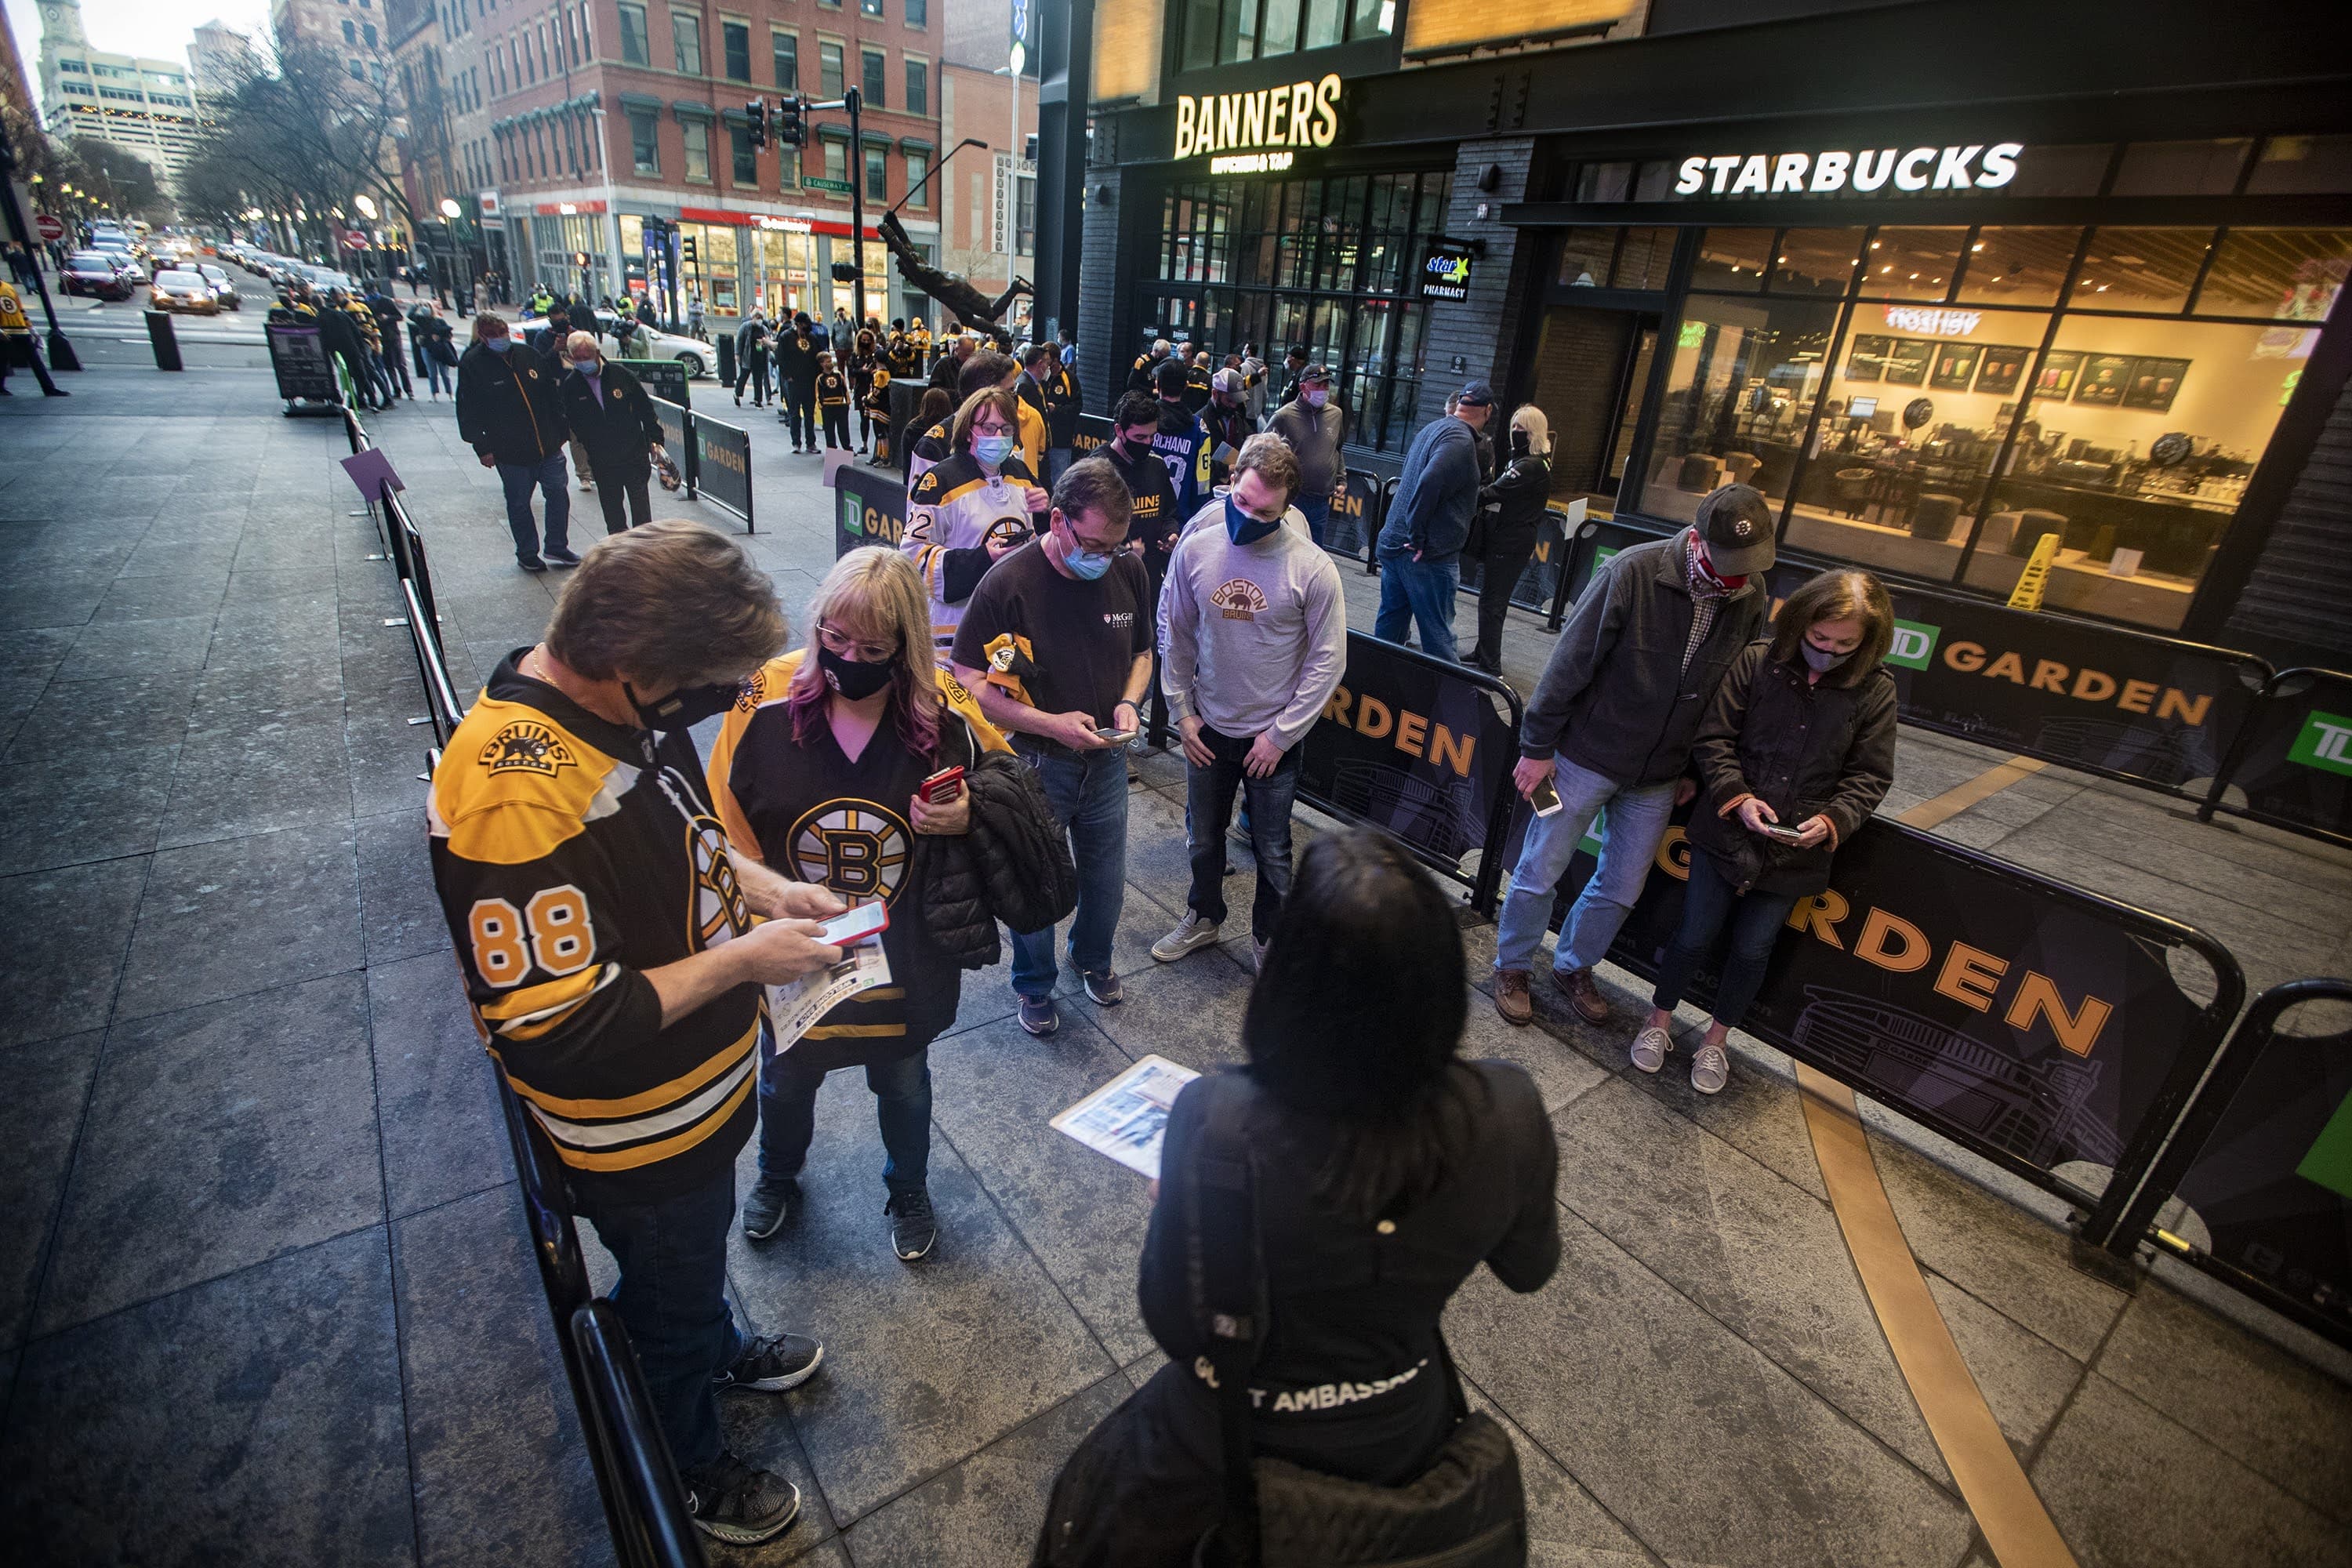 TD Garden ready to welcome back fans for Bruins game